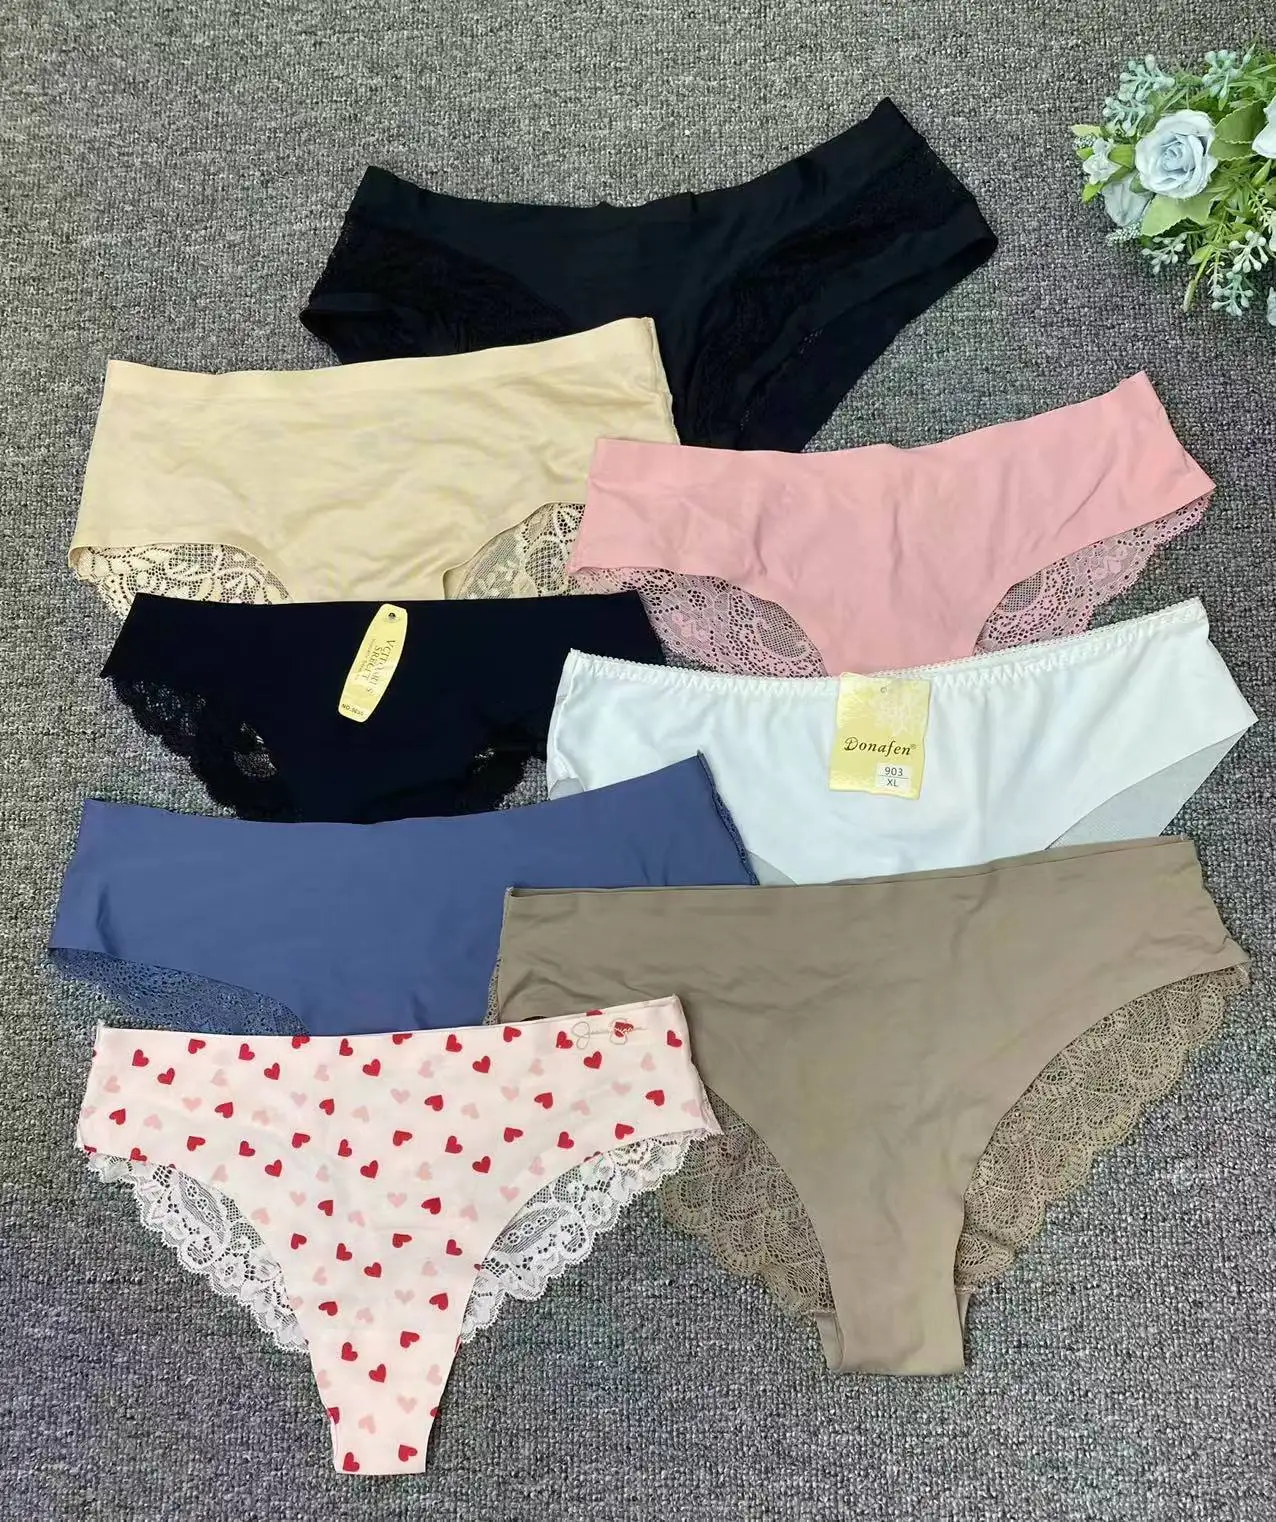 Mix High Quality Low Price Inventory High Quality Briefs Girl Panty ...